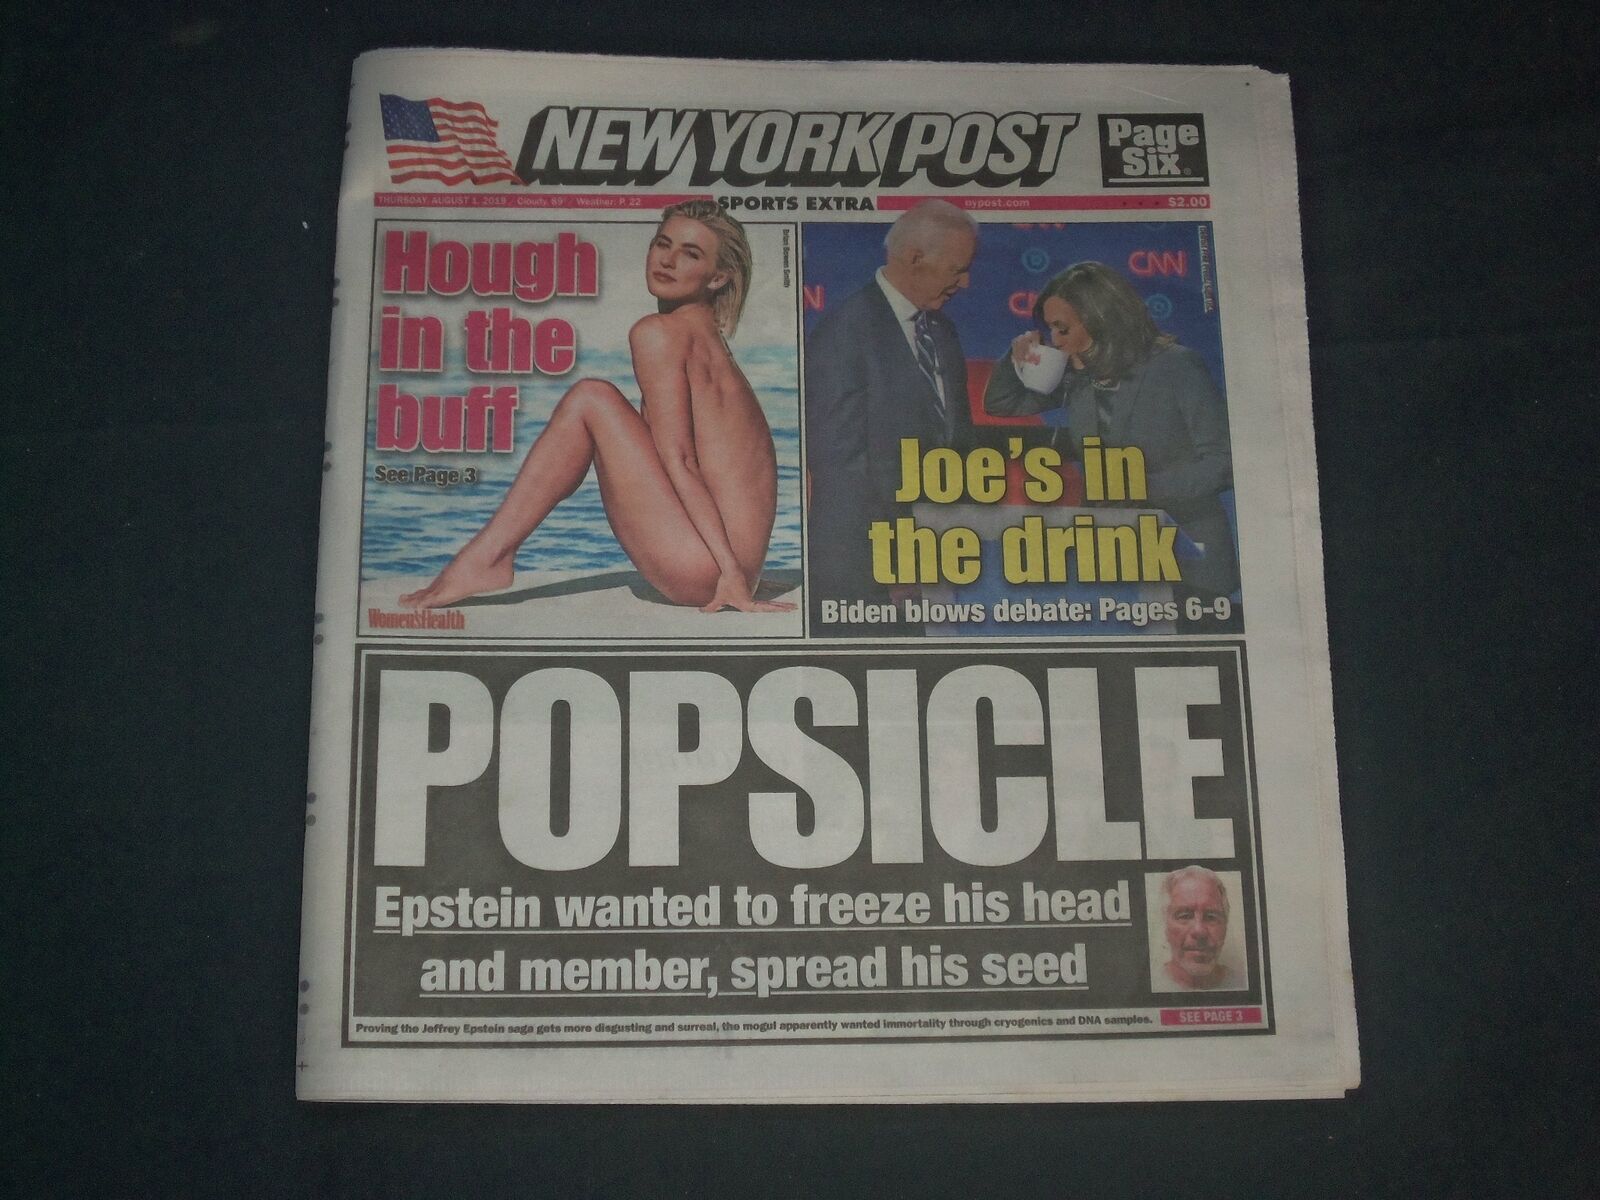 2019 AUGUST 1 NEW YORK POST NEWSPAPER -JEFFREY EPSTEIN WANTED TO FREEZE HIS HEAD